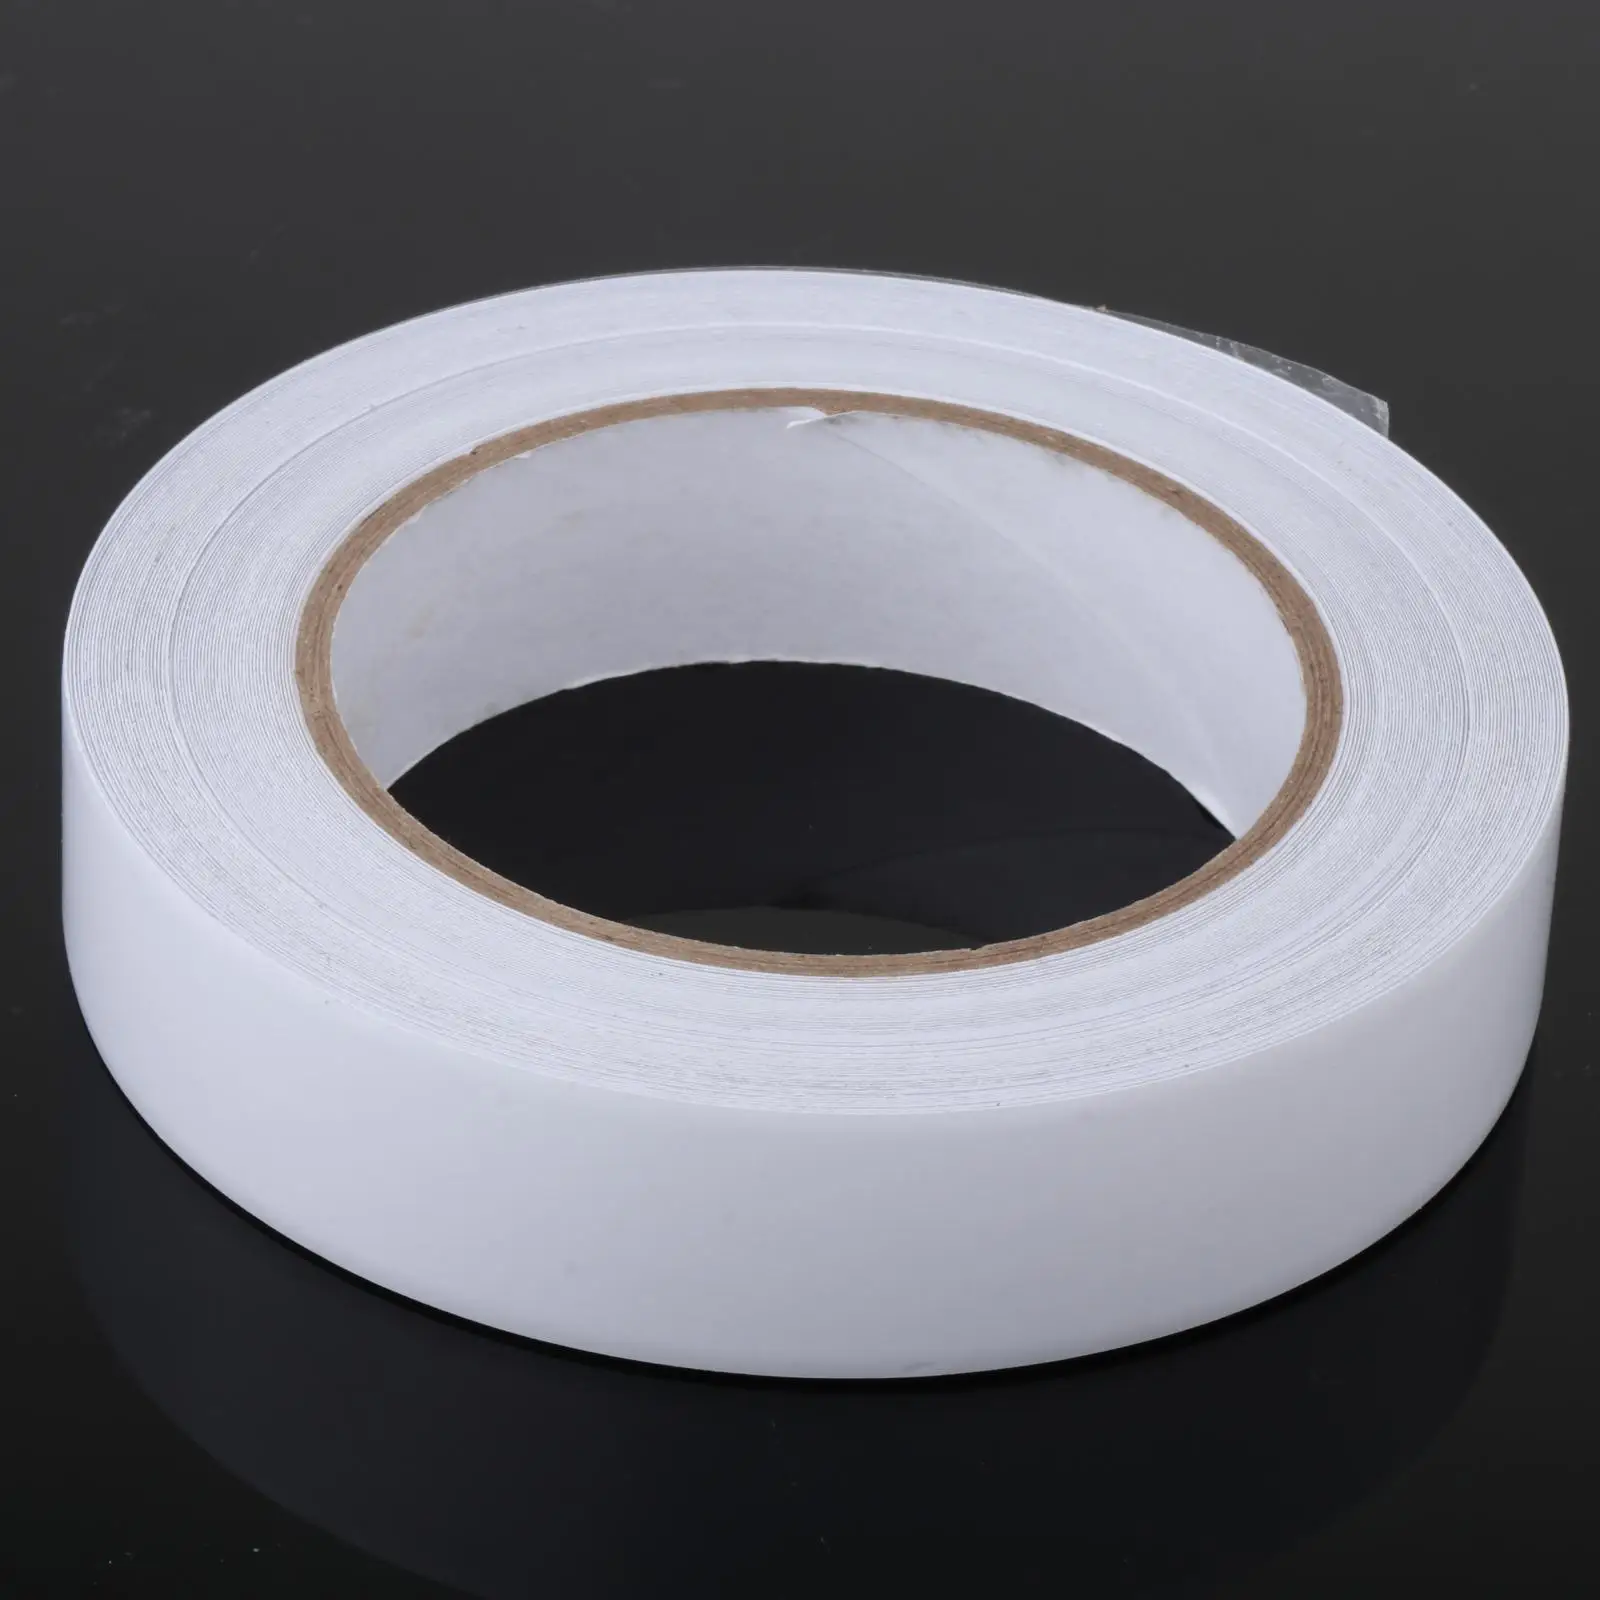 Swimming Rings Repair Tape Camping Tent Cover Patch Waterproof Awning Swimming Pool Patch for Inflatable Boat Trampoline Air Bed